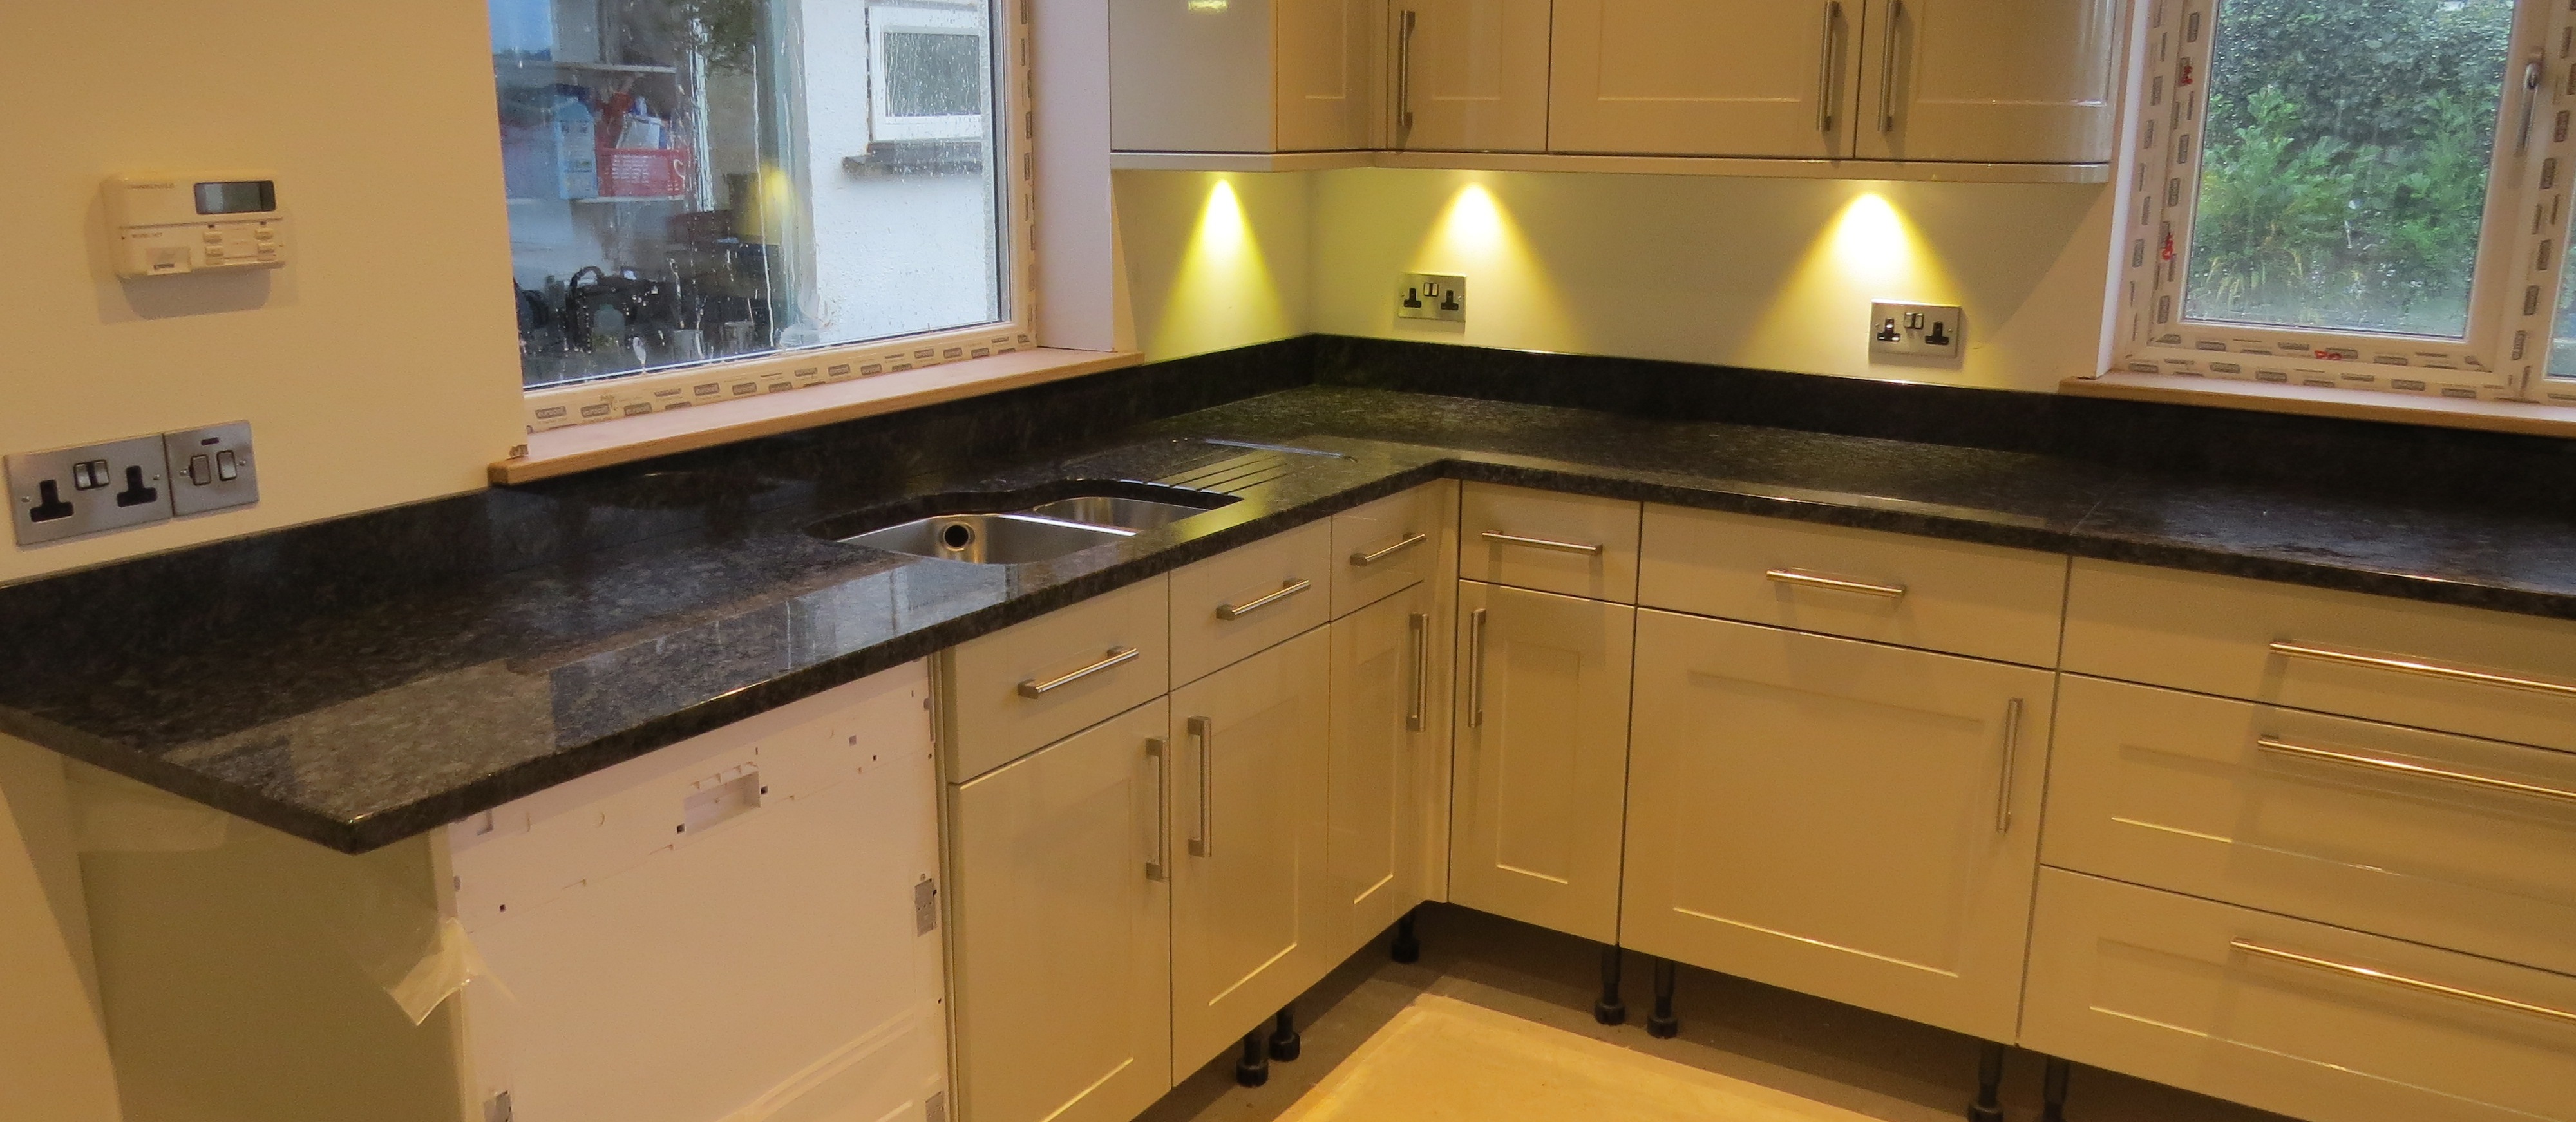 The Most Popular Kitchen Worktop Revealed